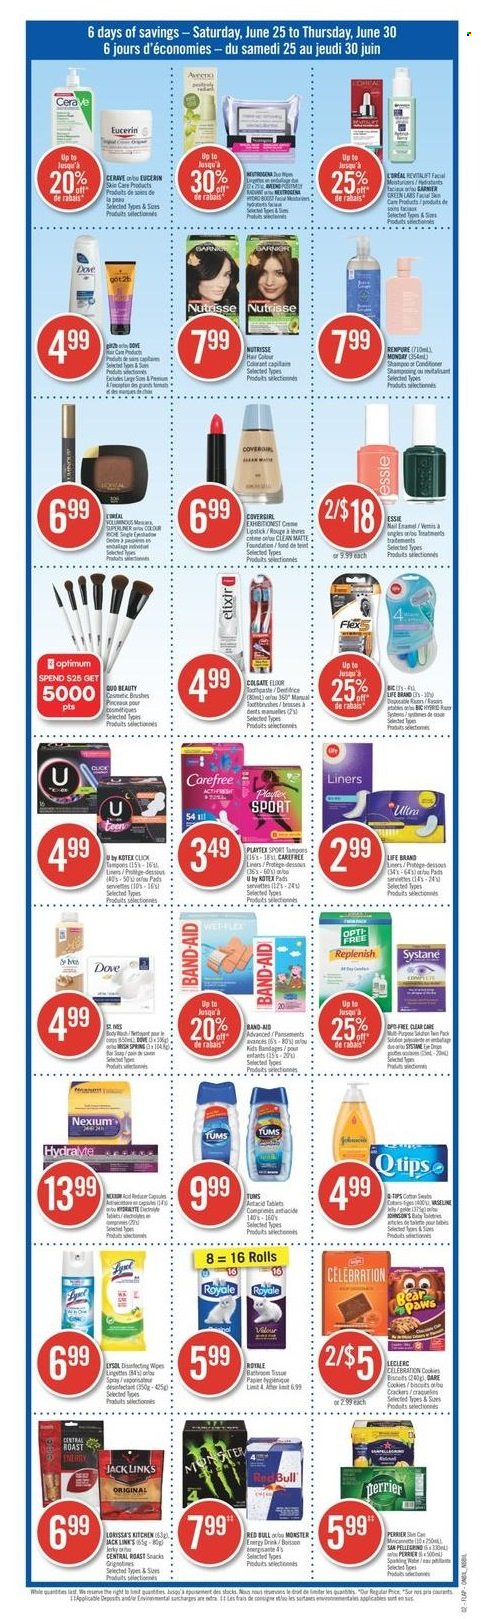 thumbnail - Shoppers Drug Mart Flyer - June 25, 2022 - June 30, 2022 - Sales products - jerky, cookies, Celebration, crackers, biscuit, Jack Link's, energy drink, Monster, Red Bull, Monster Energy, Perrier, wipes, Aveeno, Clean Mate, Playtex, Carefree, Kotex, tampons, CeraVe, L’Oréal, conditioner, BIC, nail enamel, lipstick, Optimum, Clear Care, Nexium, Antacid, band-aid, Dove, Colgate, Eucerin, Garnier, shampoo, Systane. Page 22.